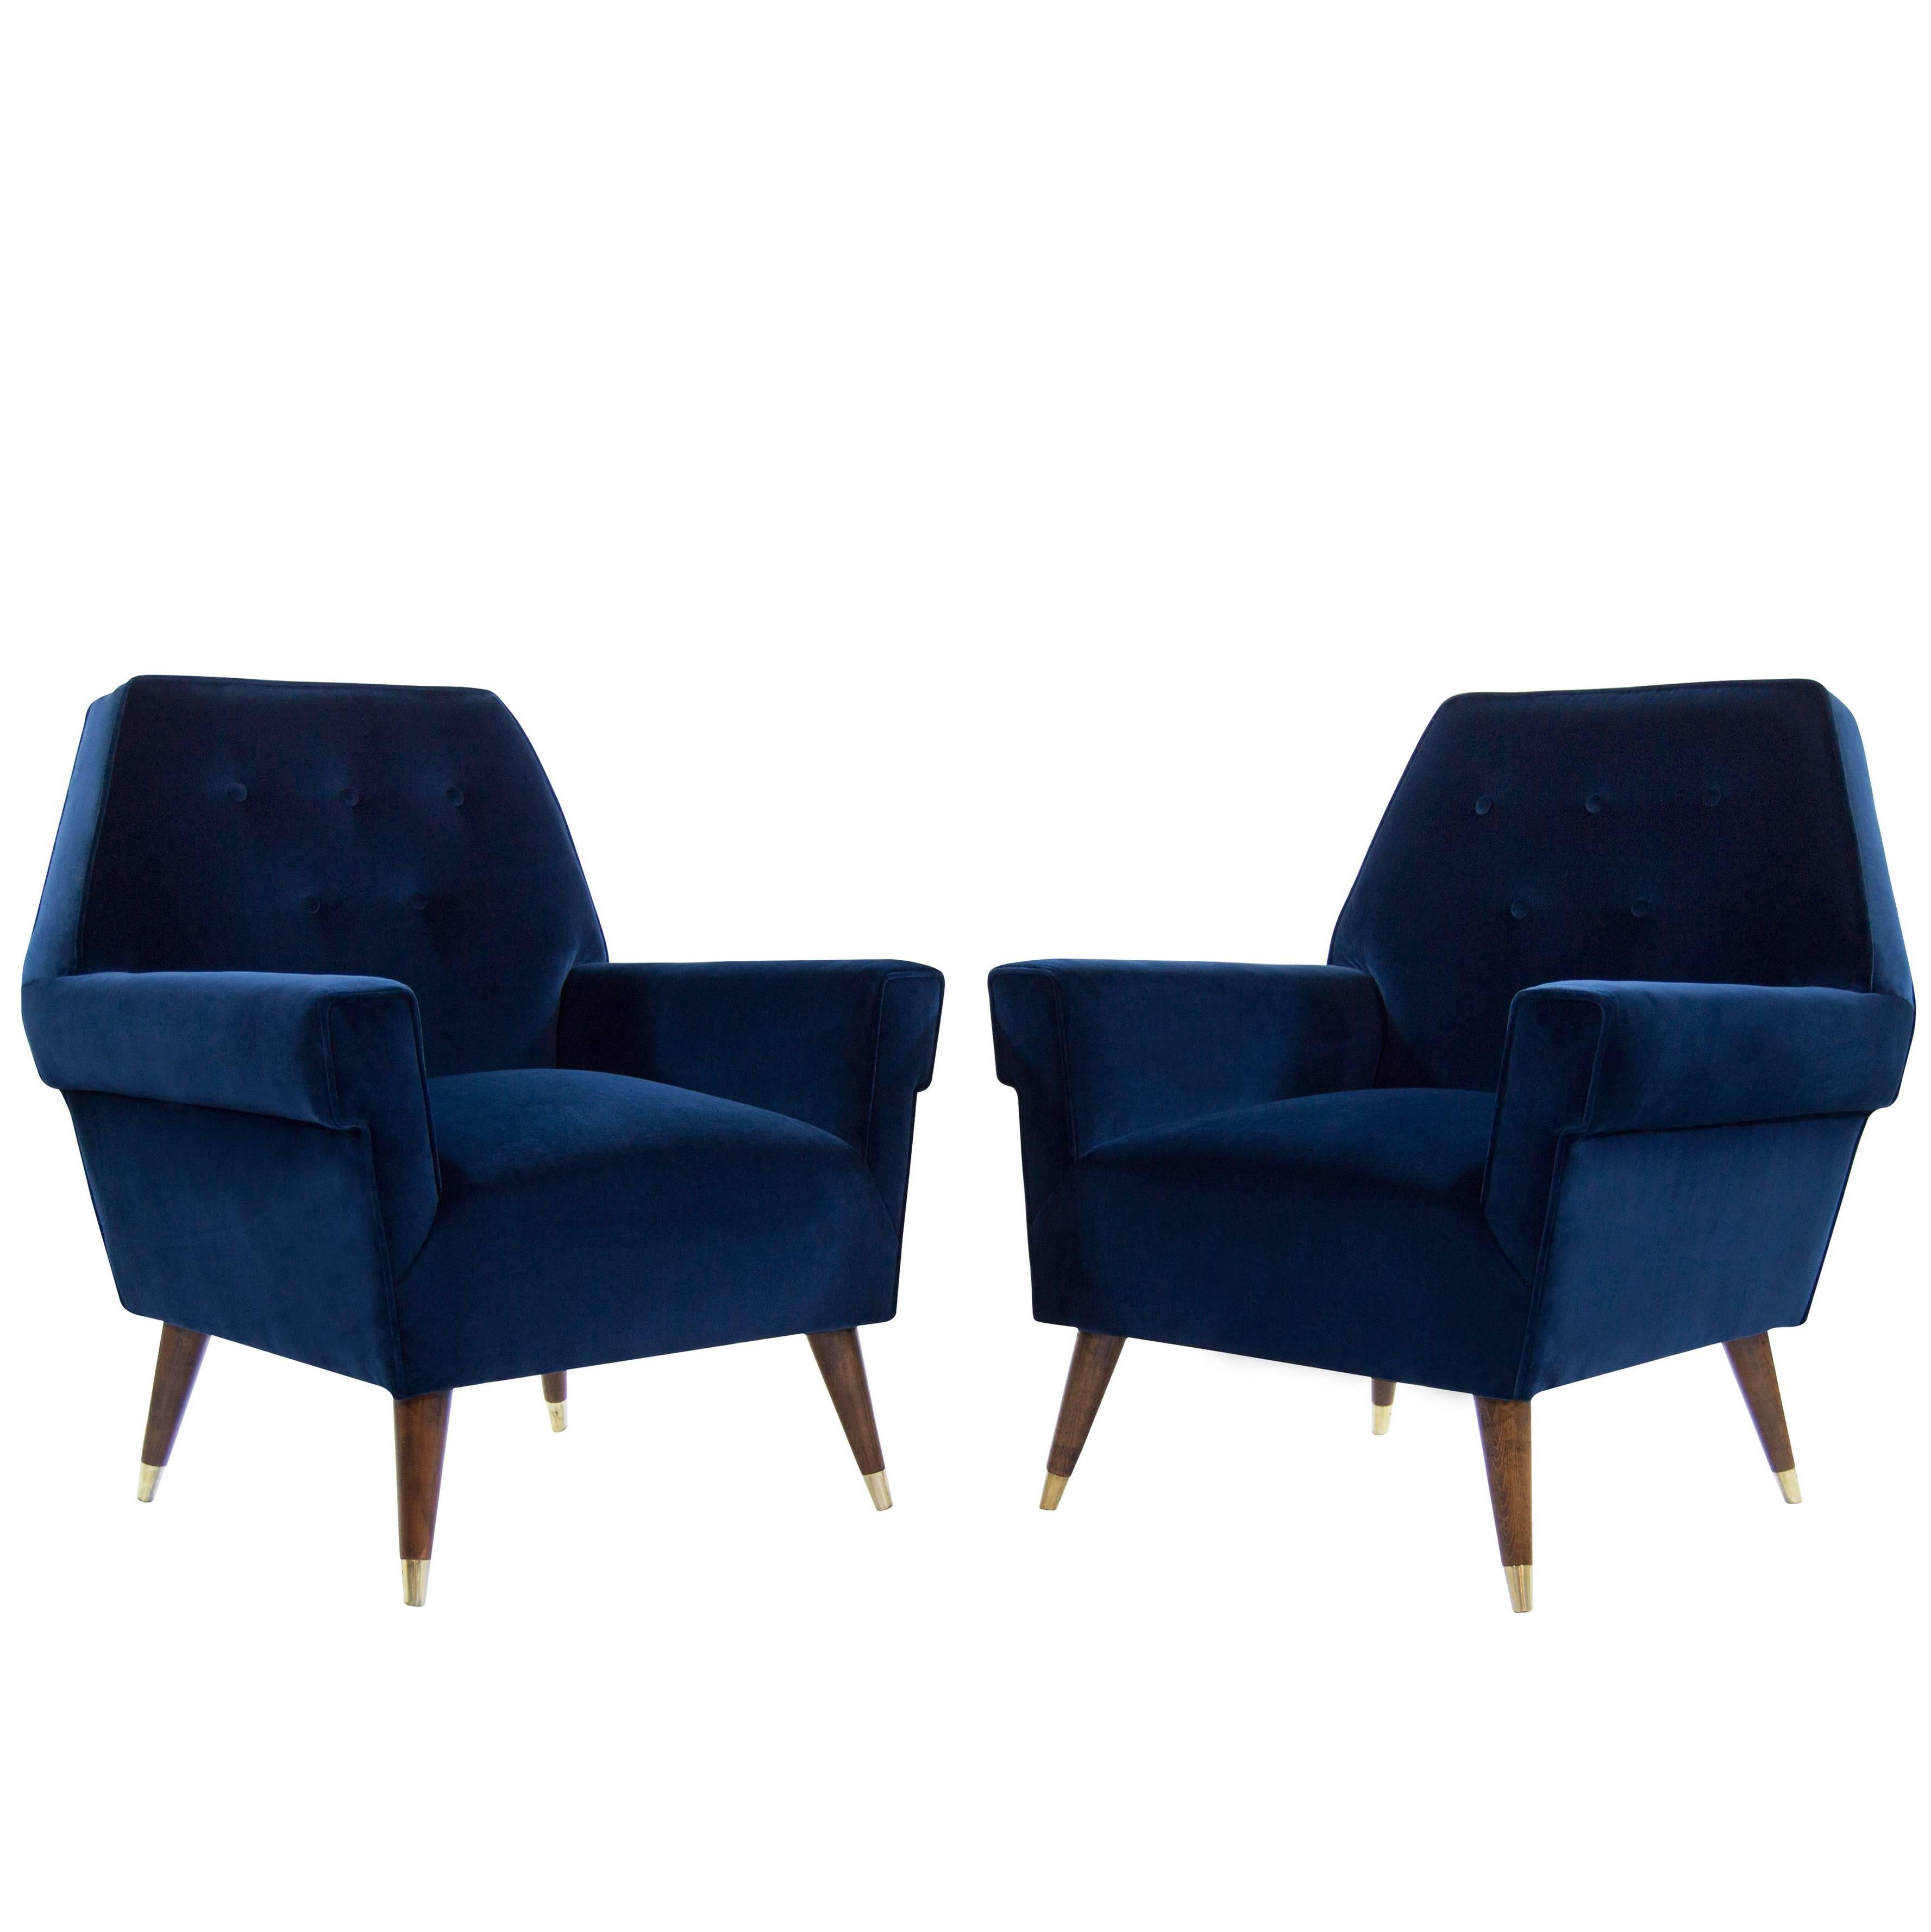 Italian Navy Blue Velvet Lounge Chairs with Splayed Legs